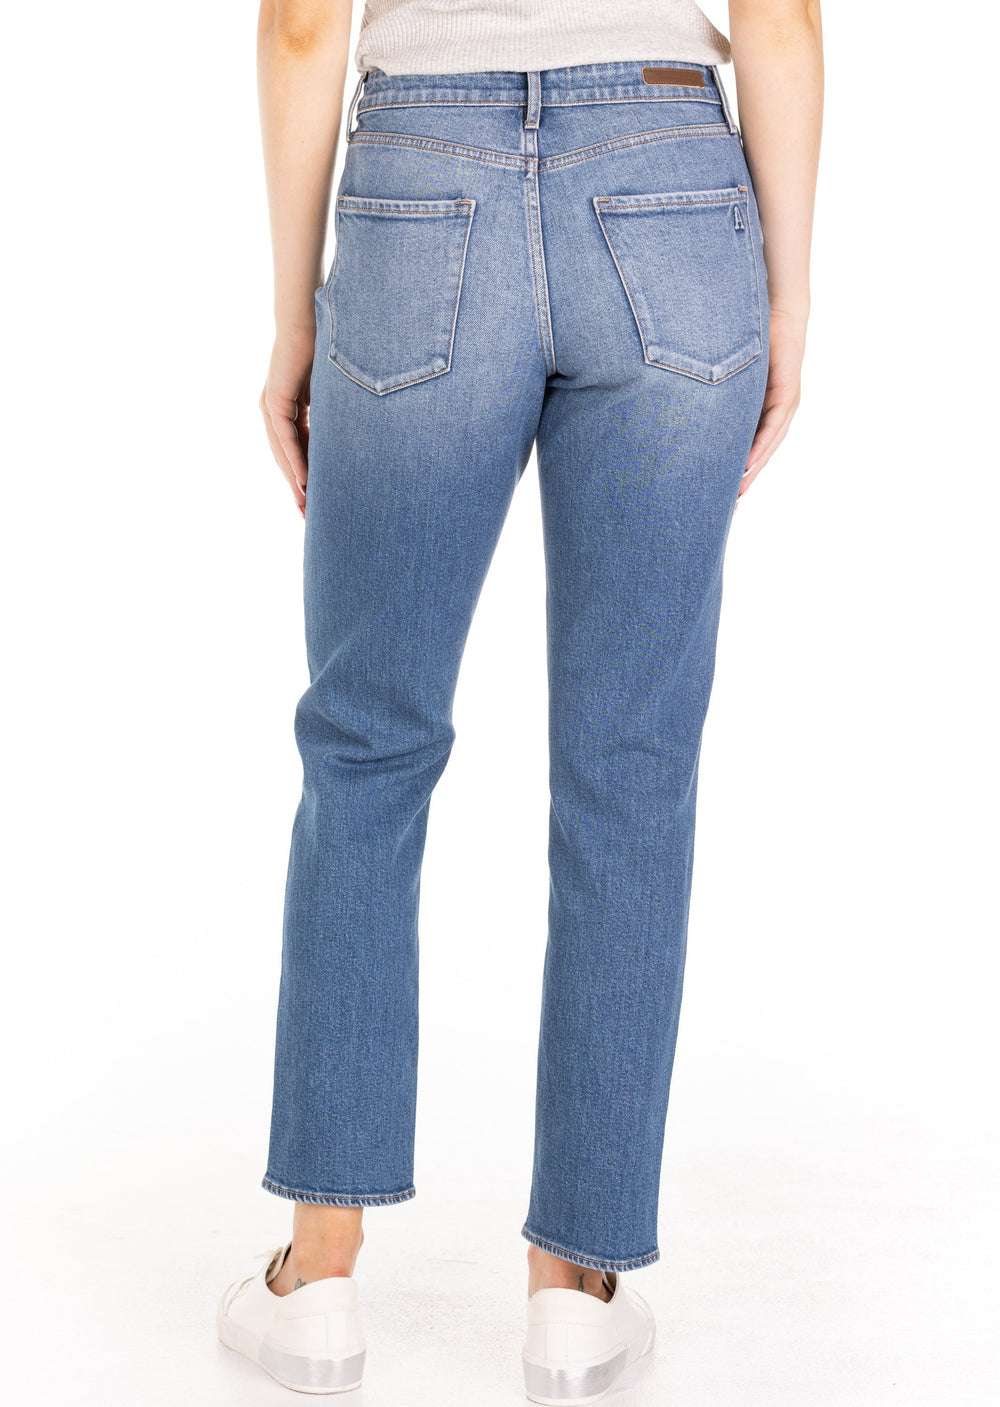 Articles of Society Jeans for Women